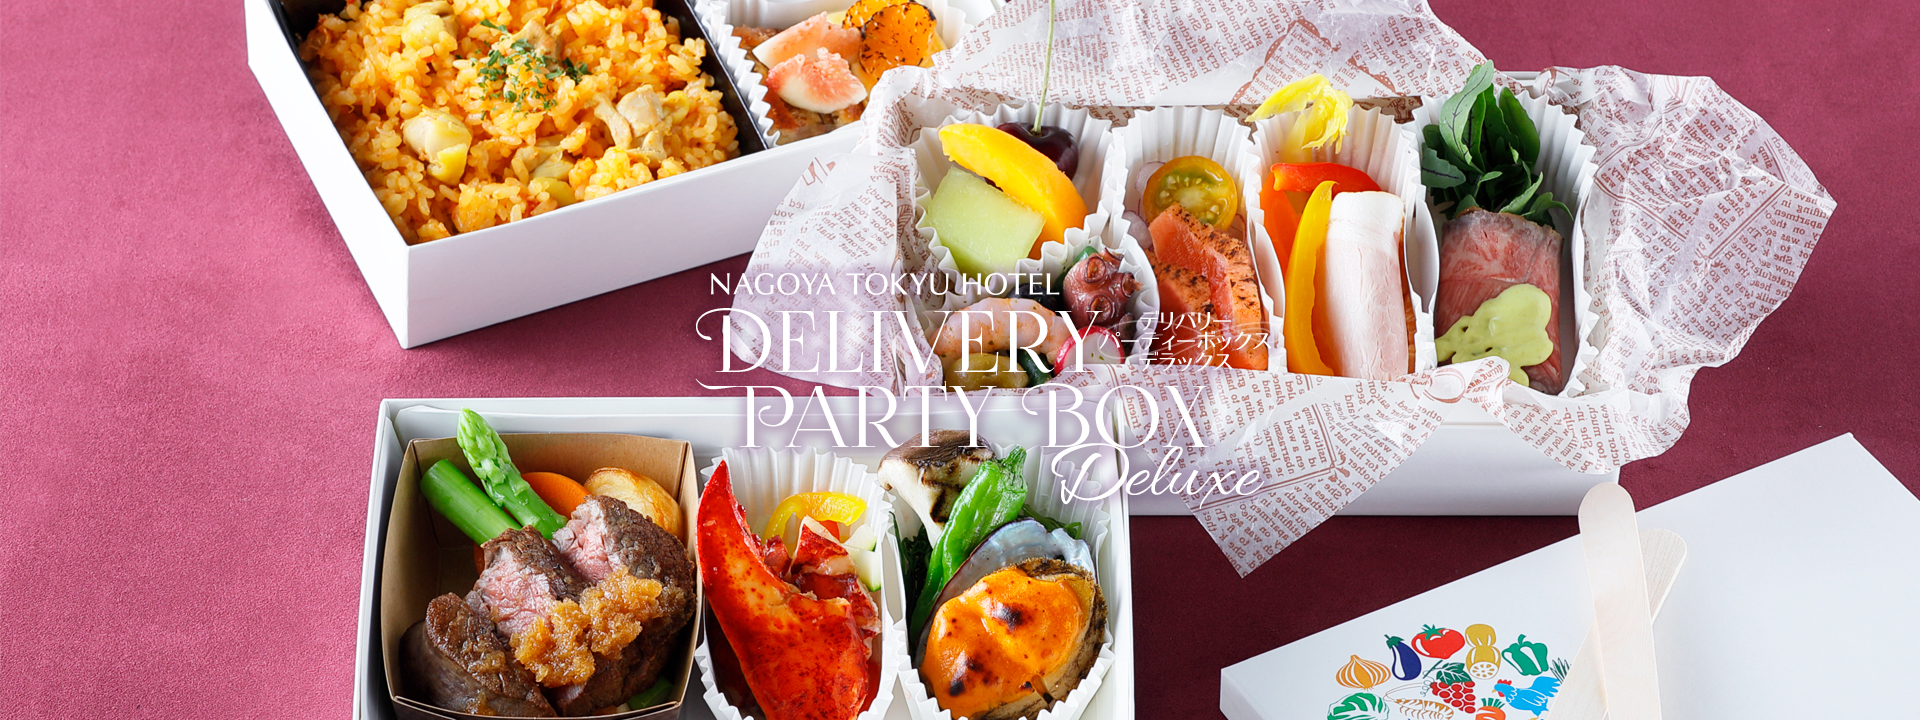 DELIVERY PARTY BOX Deluxe ～デリバリー パーティー ボックス デラックス～